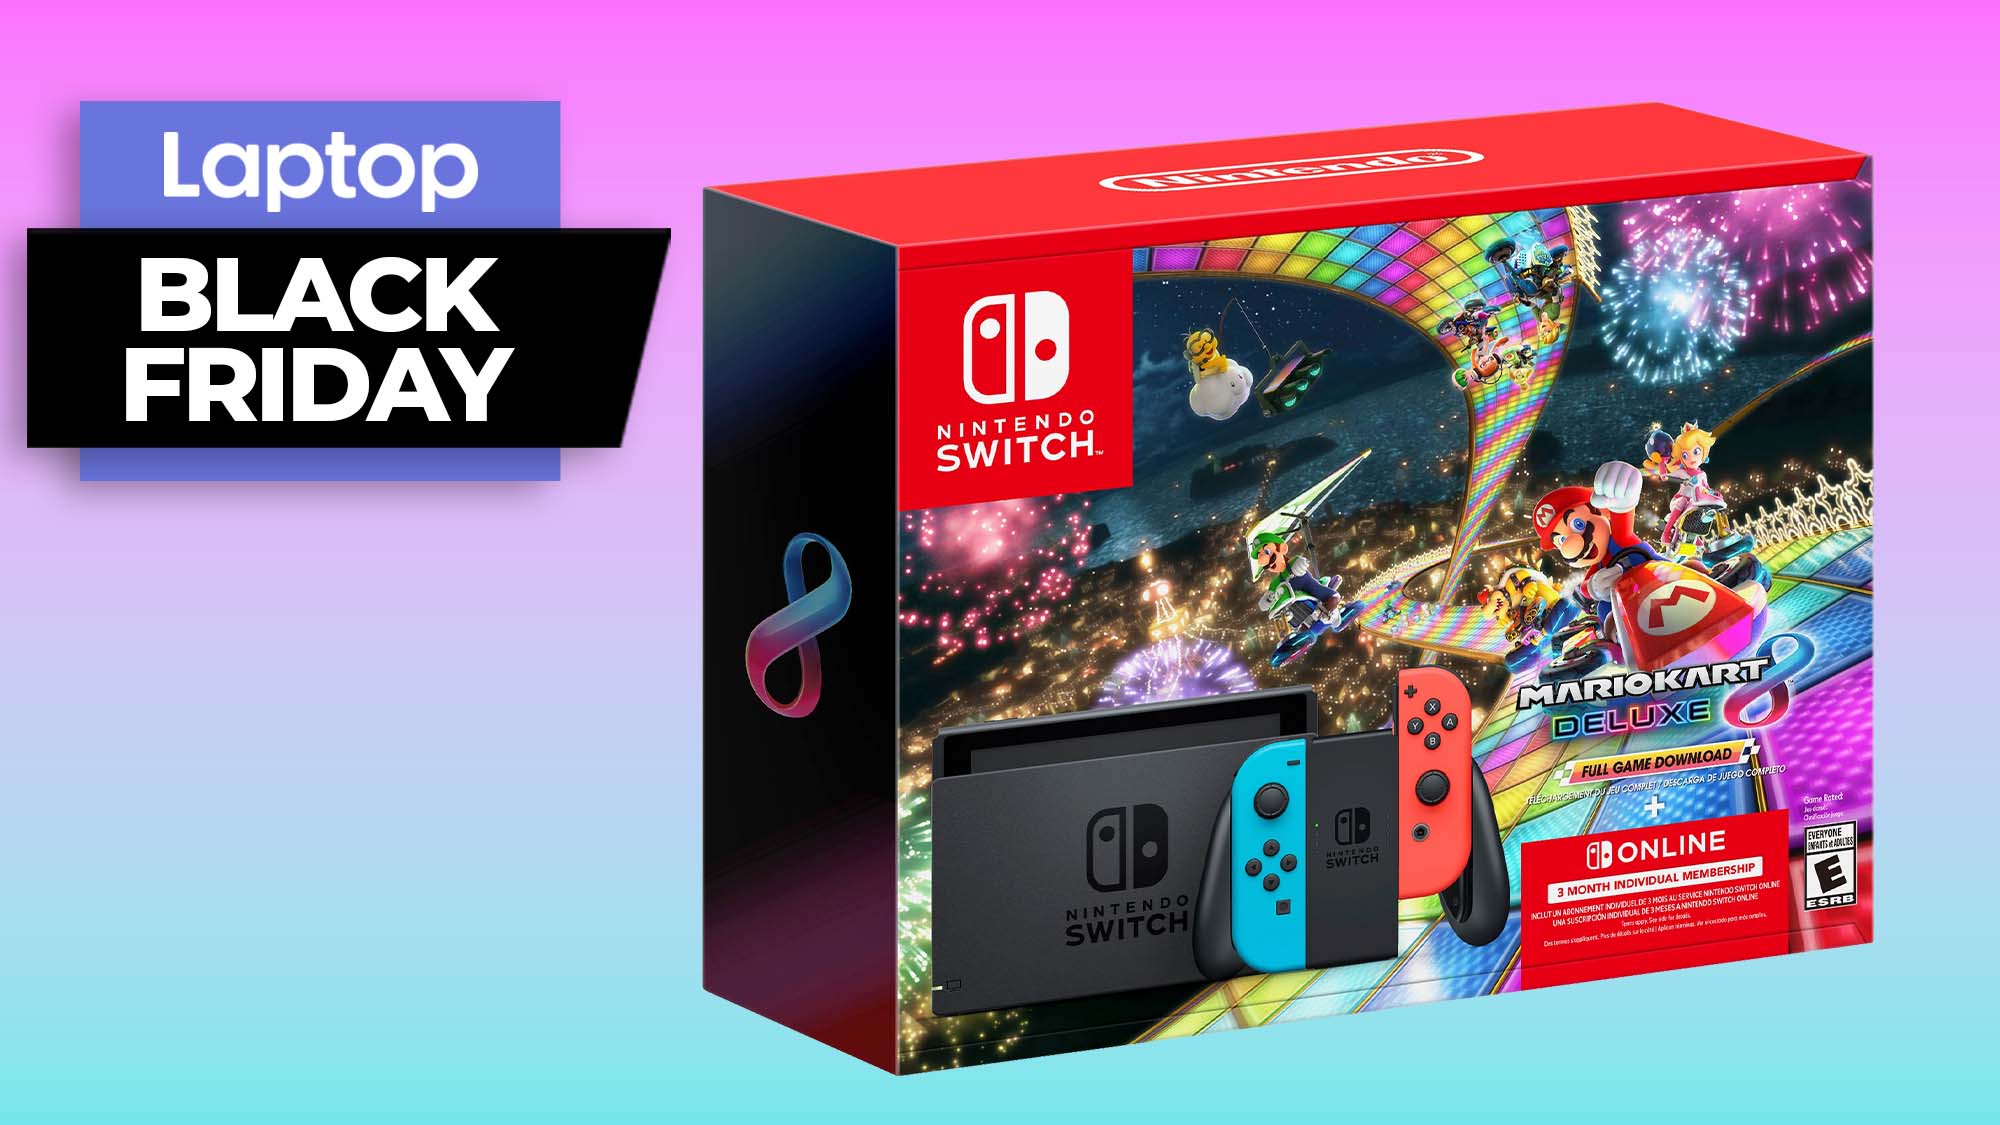 Nintendo Switch Mario Kart 8 Deluxe bundle box on a gradient background with a Black Friday banner in the upper-left corner